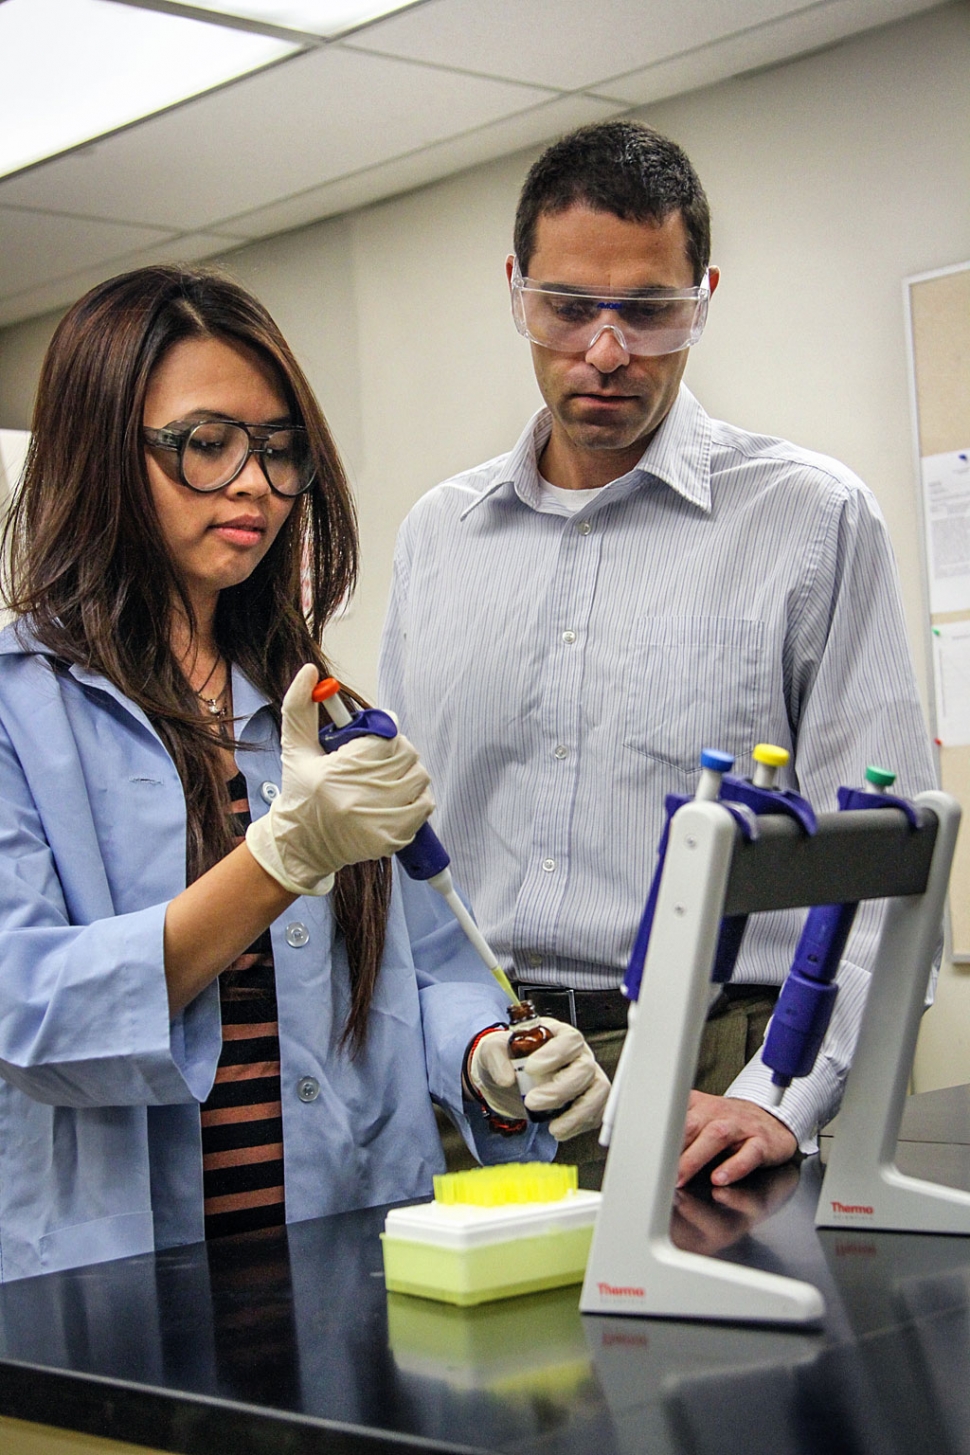 Huong Nguyen worked under the mentorship of chemistry professor Grady Hanrahan to develop a model to assess pesticide exposure in low-income communities, a project she will present at the Festival of Scholars. Credit: Brian Stethem/CLU